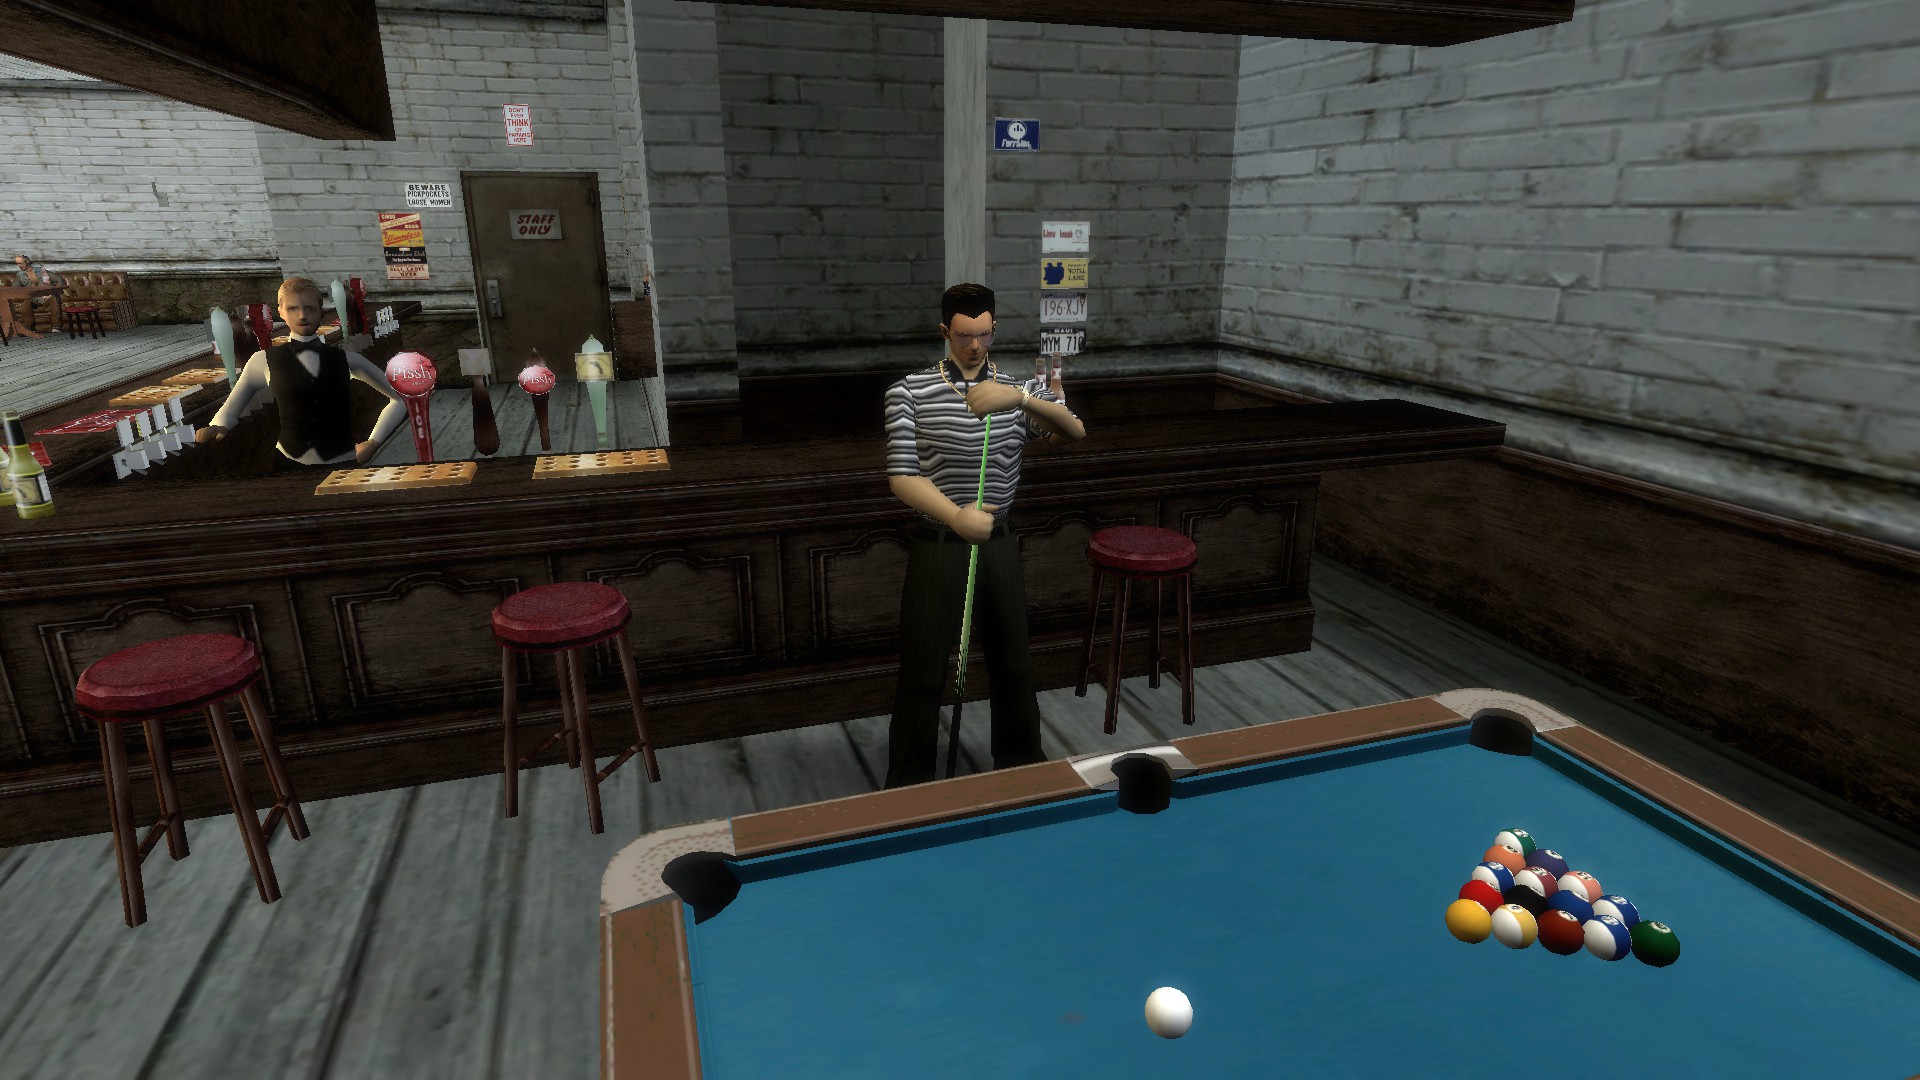 Image 5 - The PoolRooms Experience - ModDB